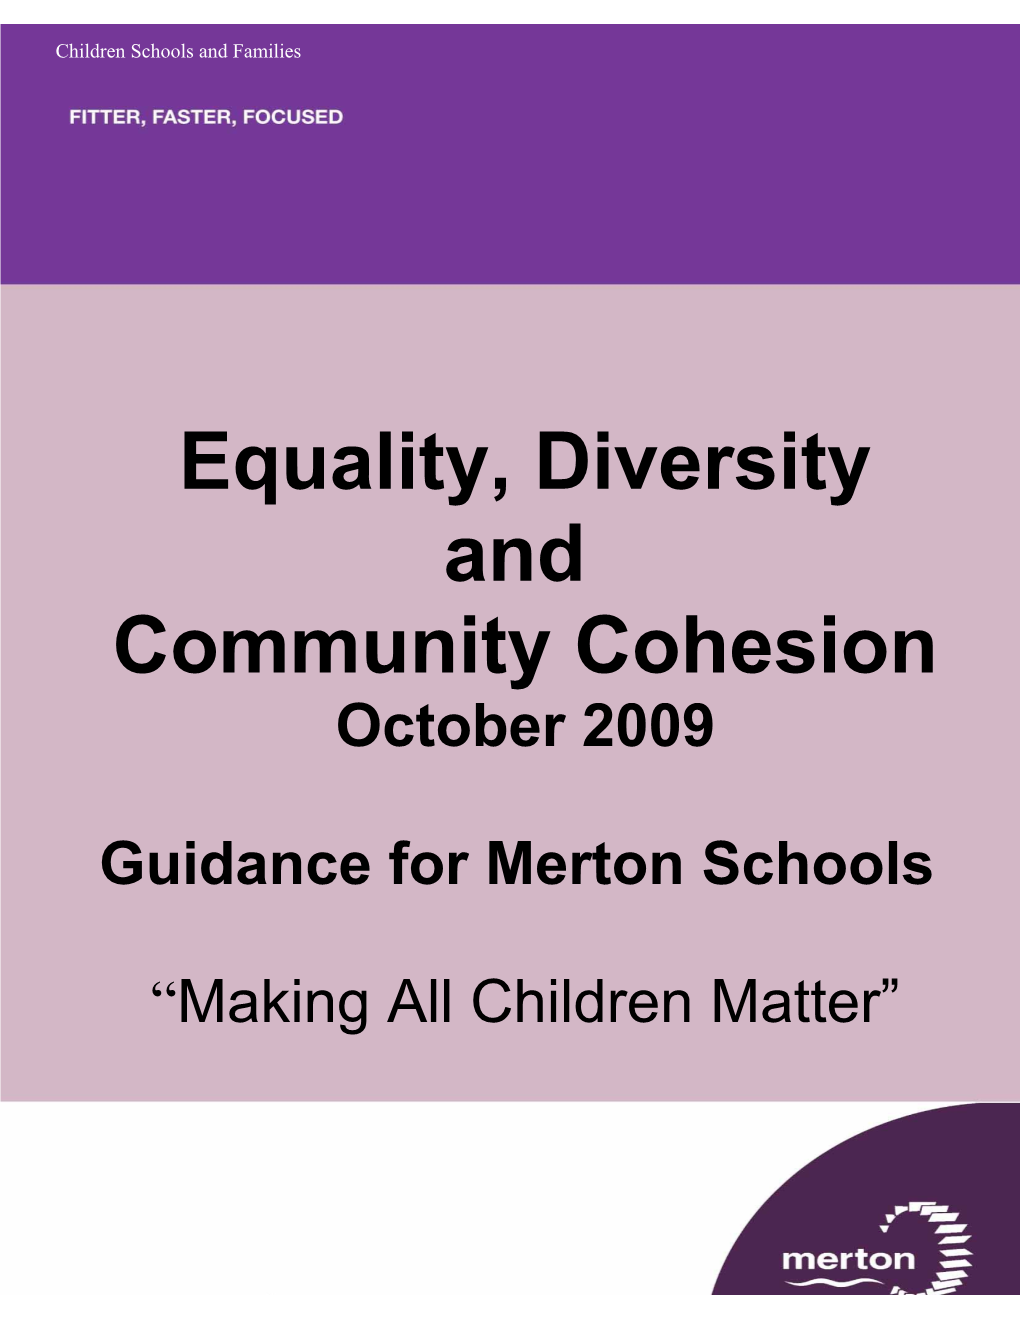 Equality, Diversity and Community Cohesion